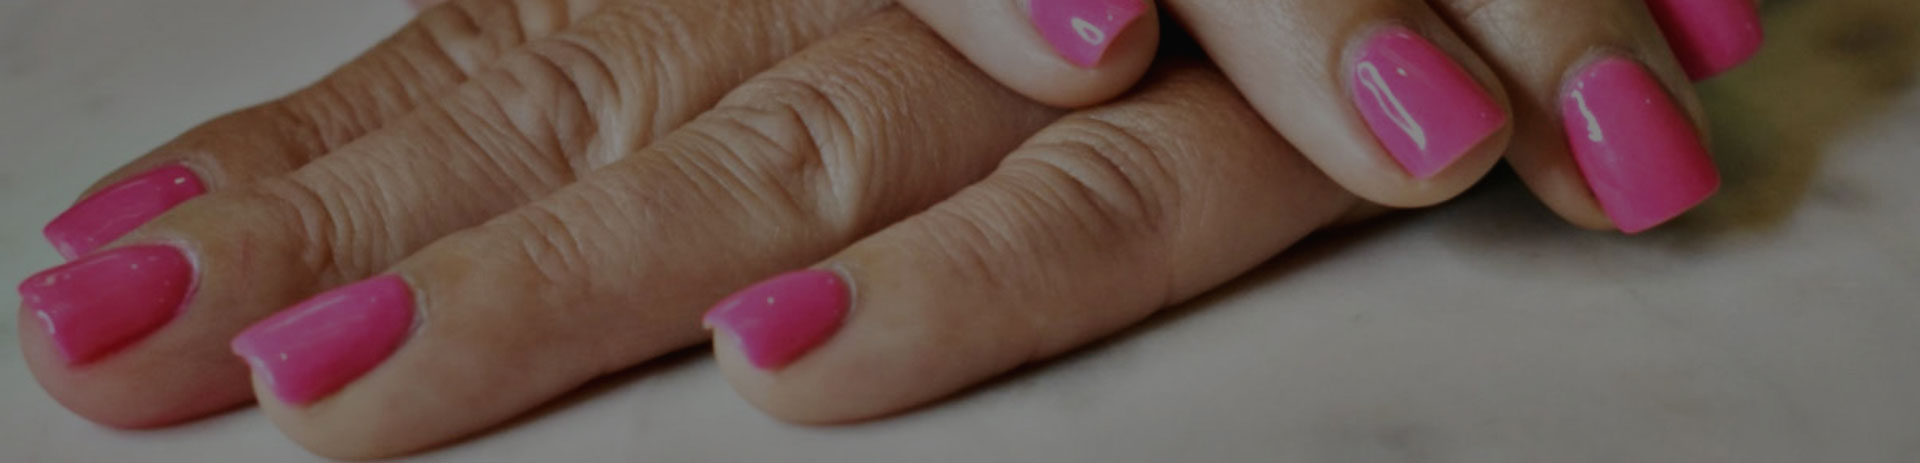 Best Rated Nails Salon in Davie, Florida